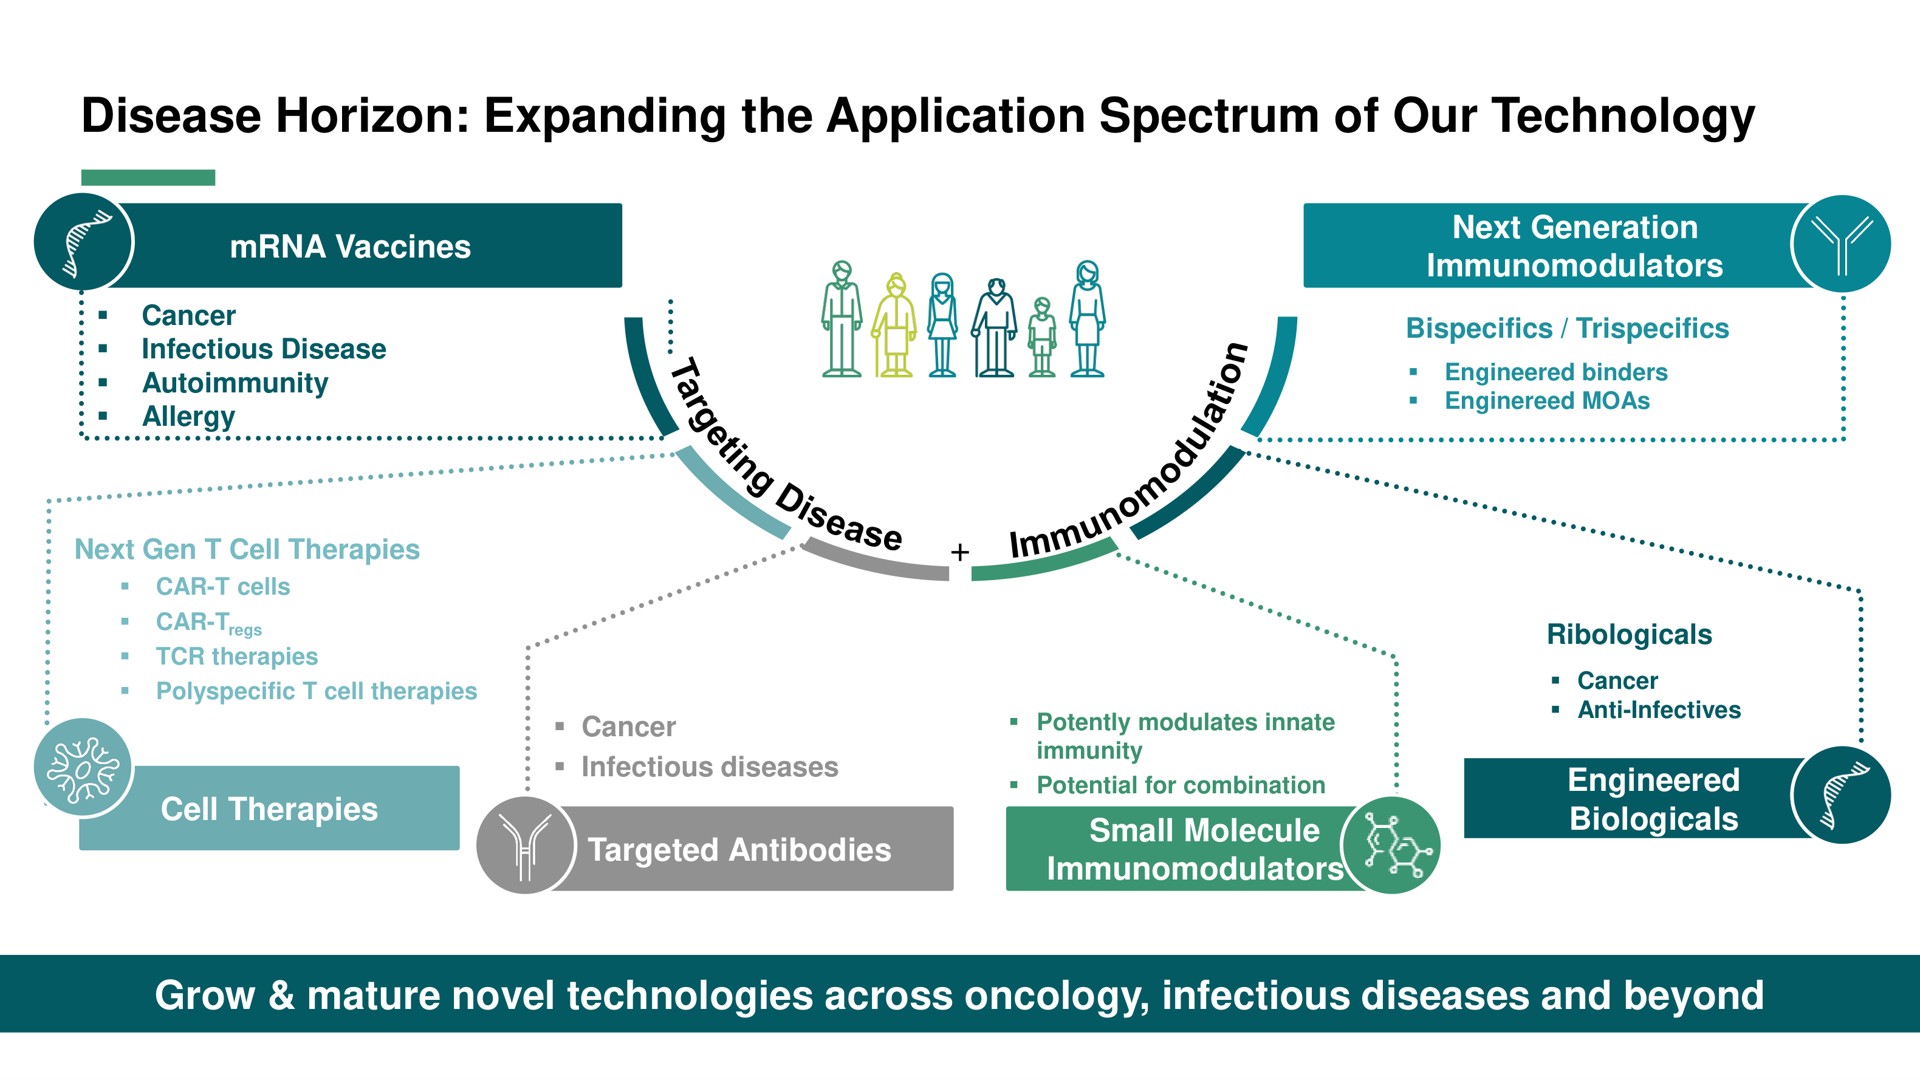 disease horizon expanding the application spectrum of our technology grow mature novel technologies across oncology infectious diseases and beyond | BioNTech